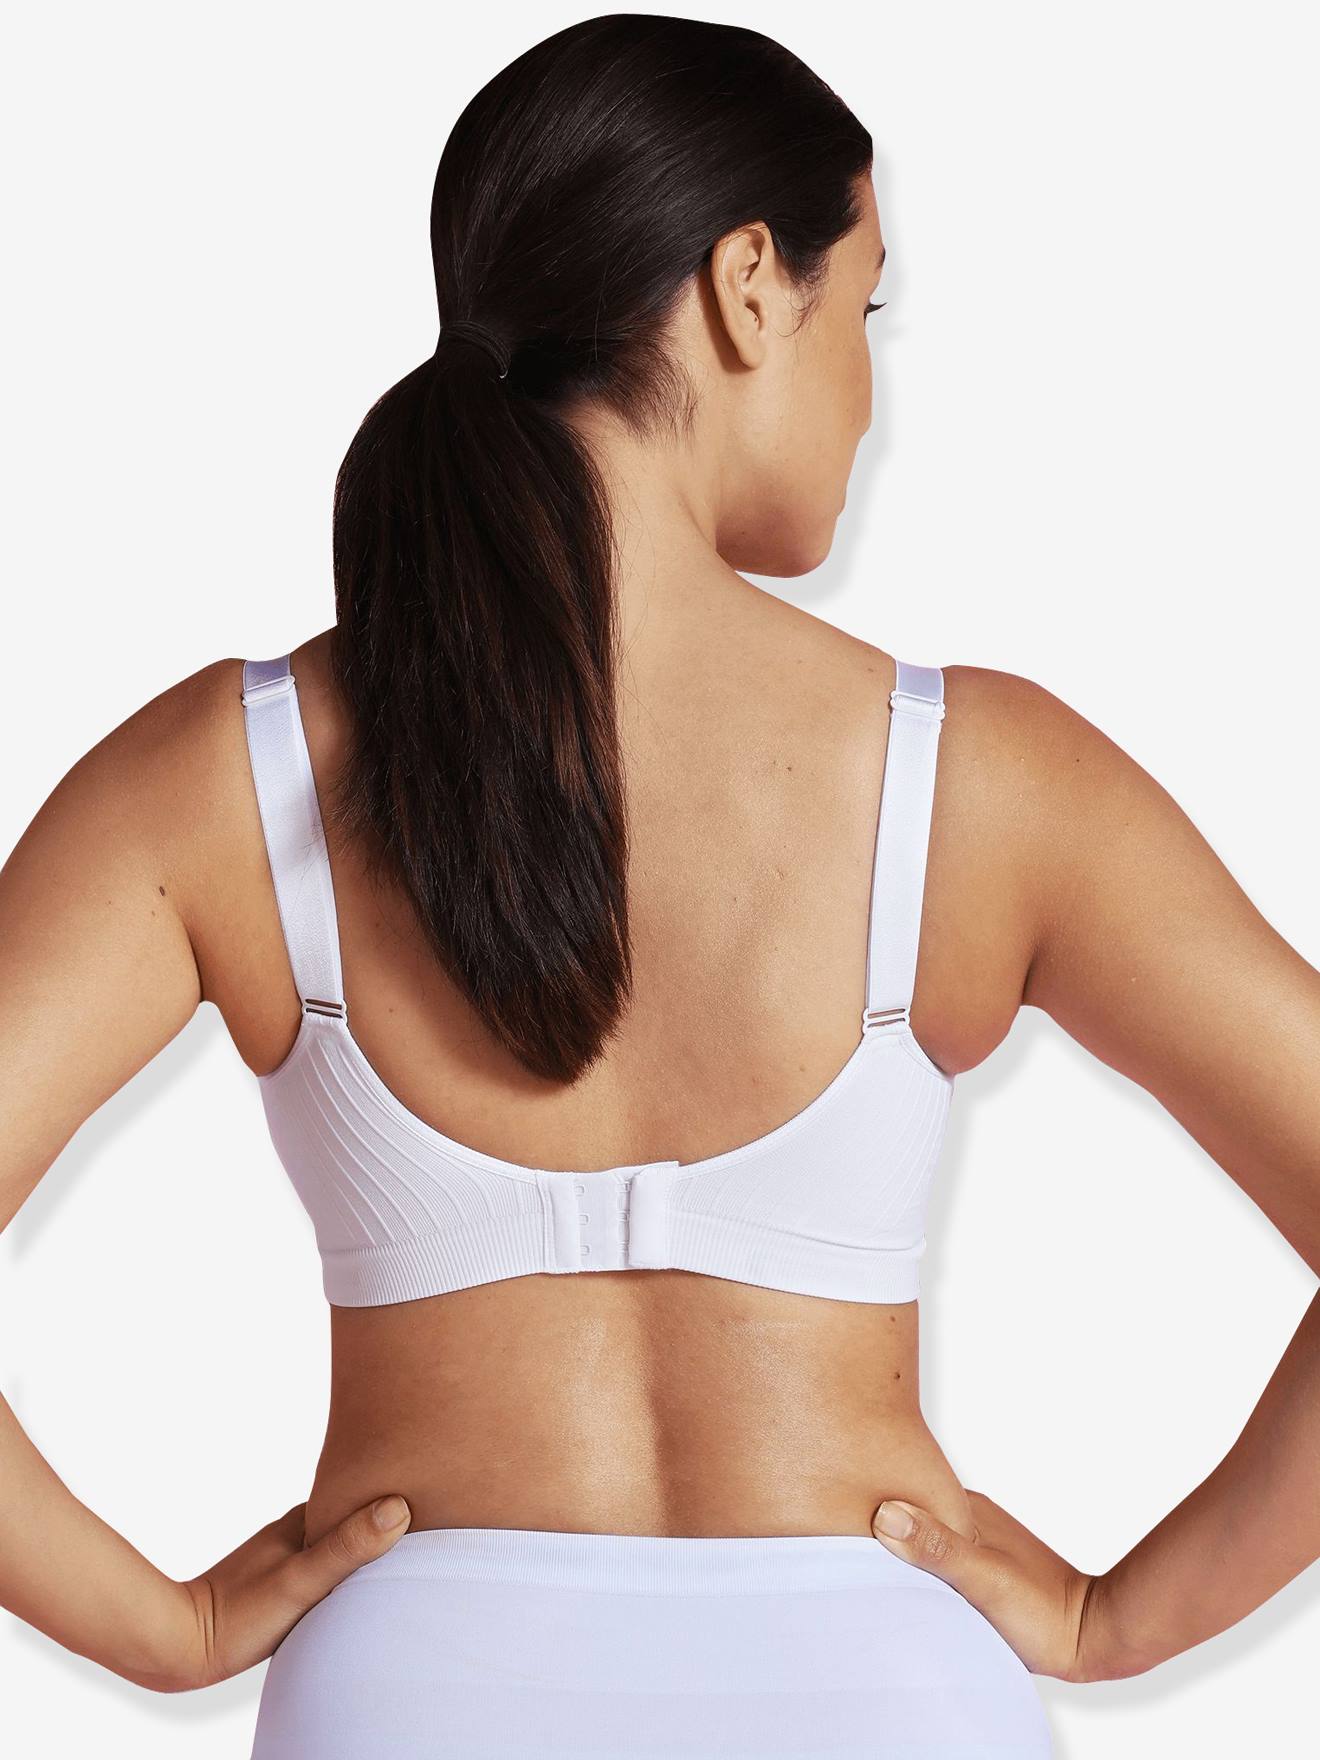 Carriwell Padded GelWire® Support Nursing Bra, White woman